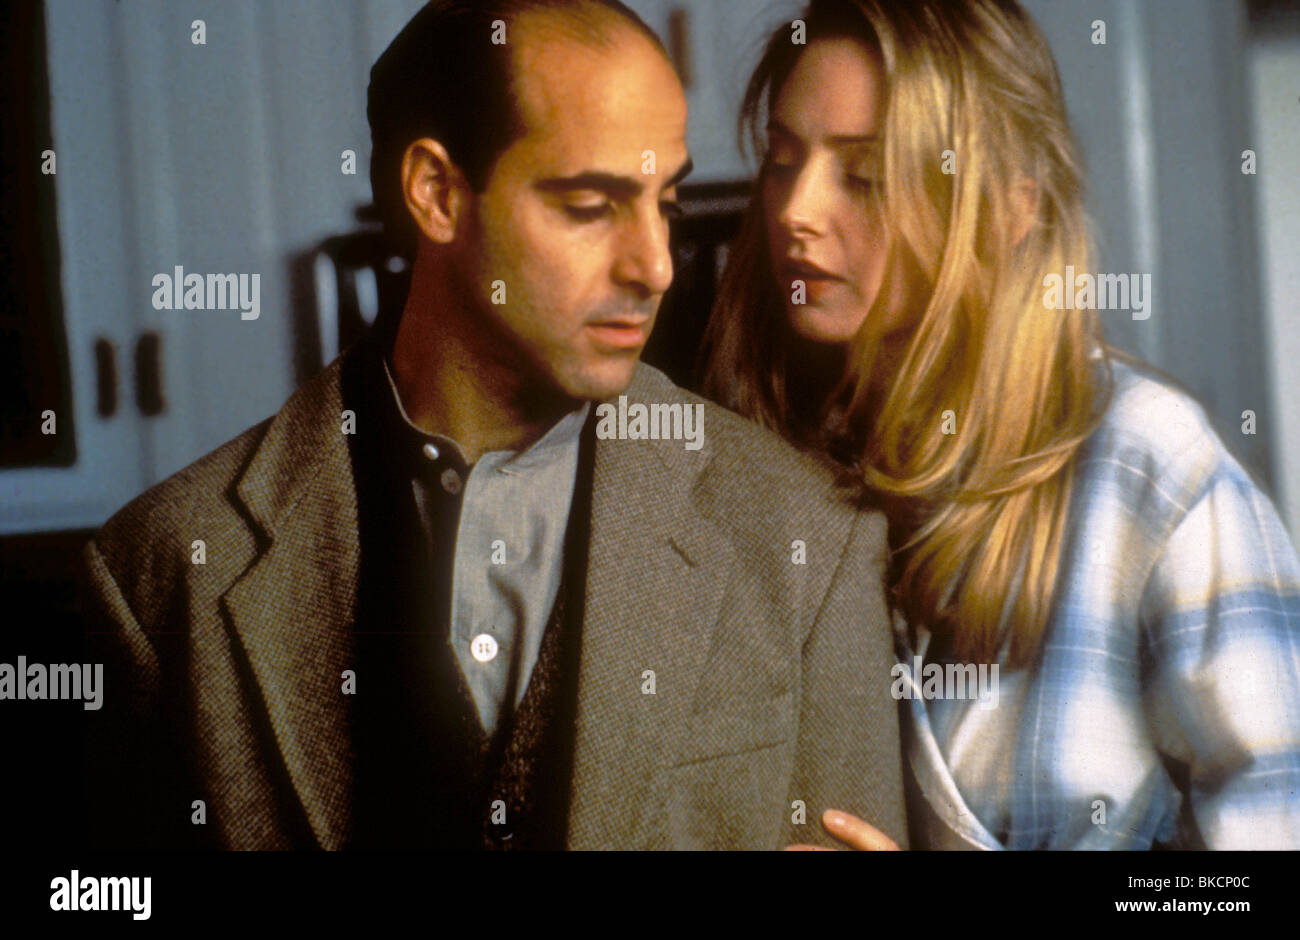 THE DAYTRIPPERS (1996) STANLEY TUCCI, HOPE DAVIS DAYT 002 Stock Photo